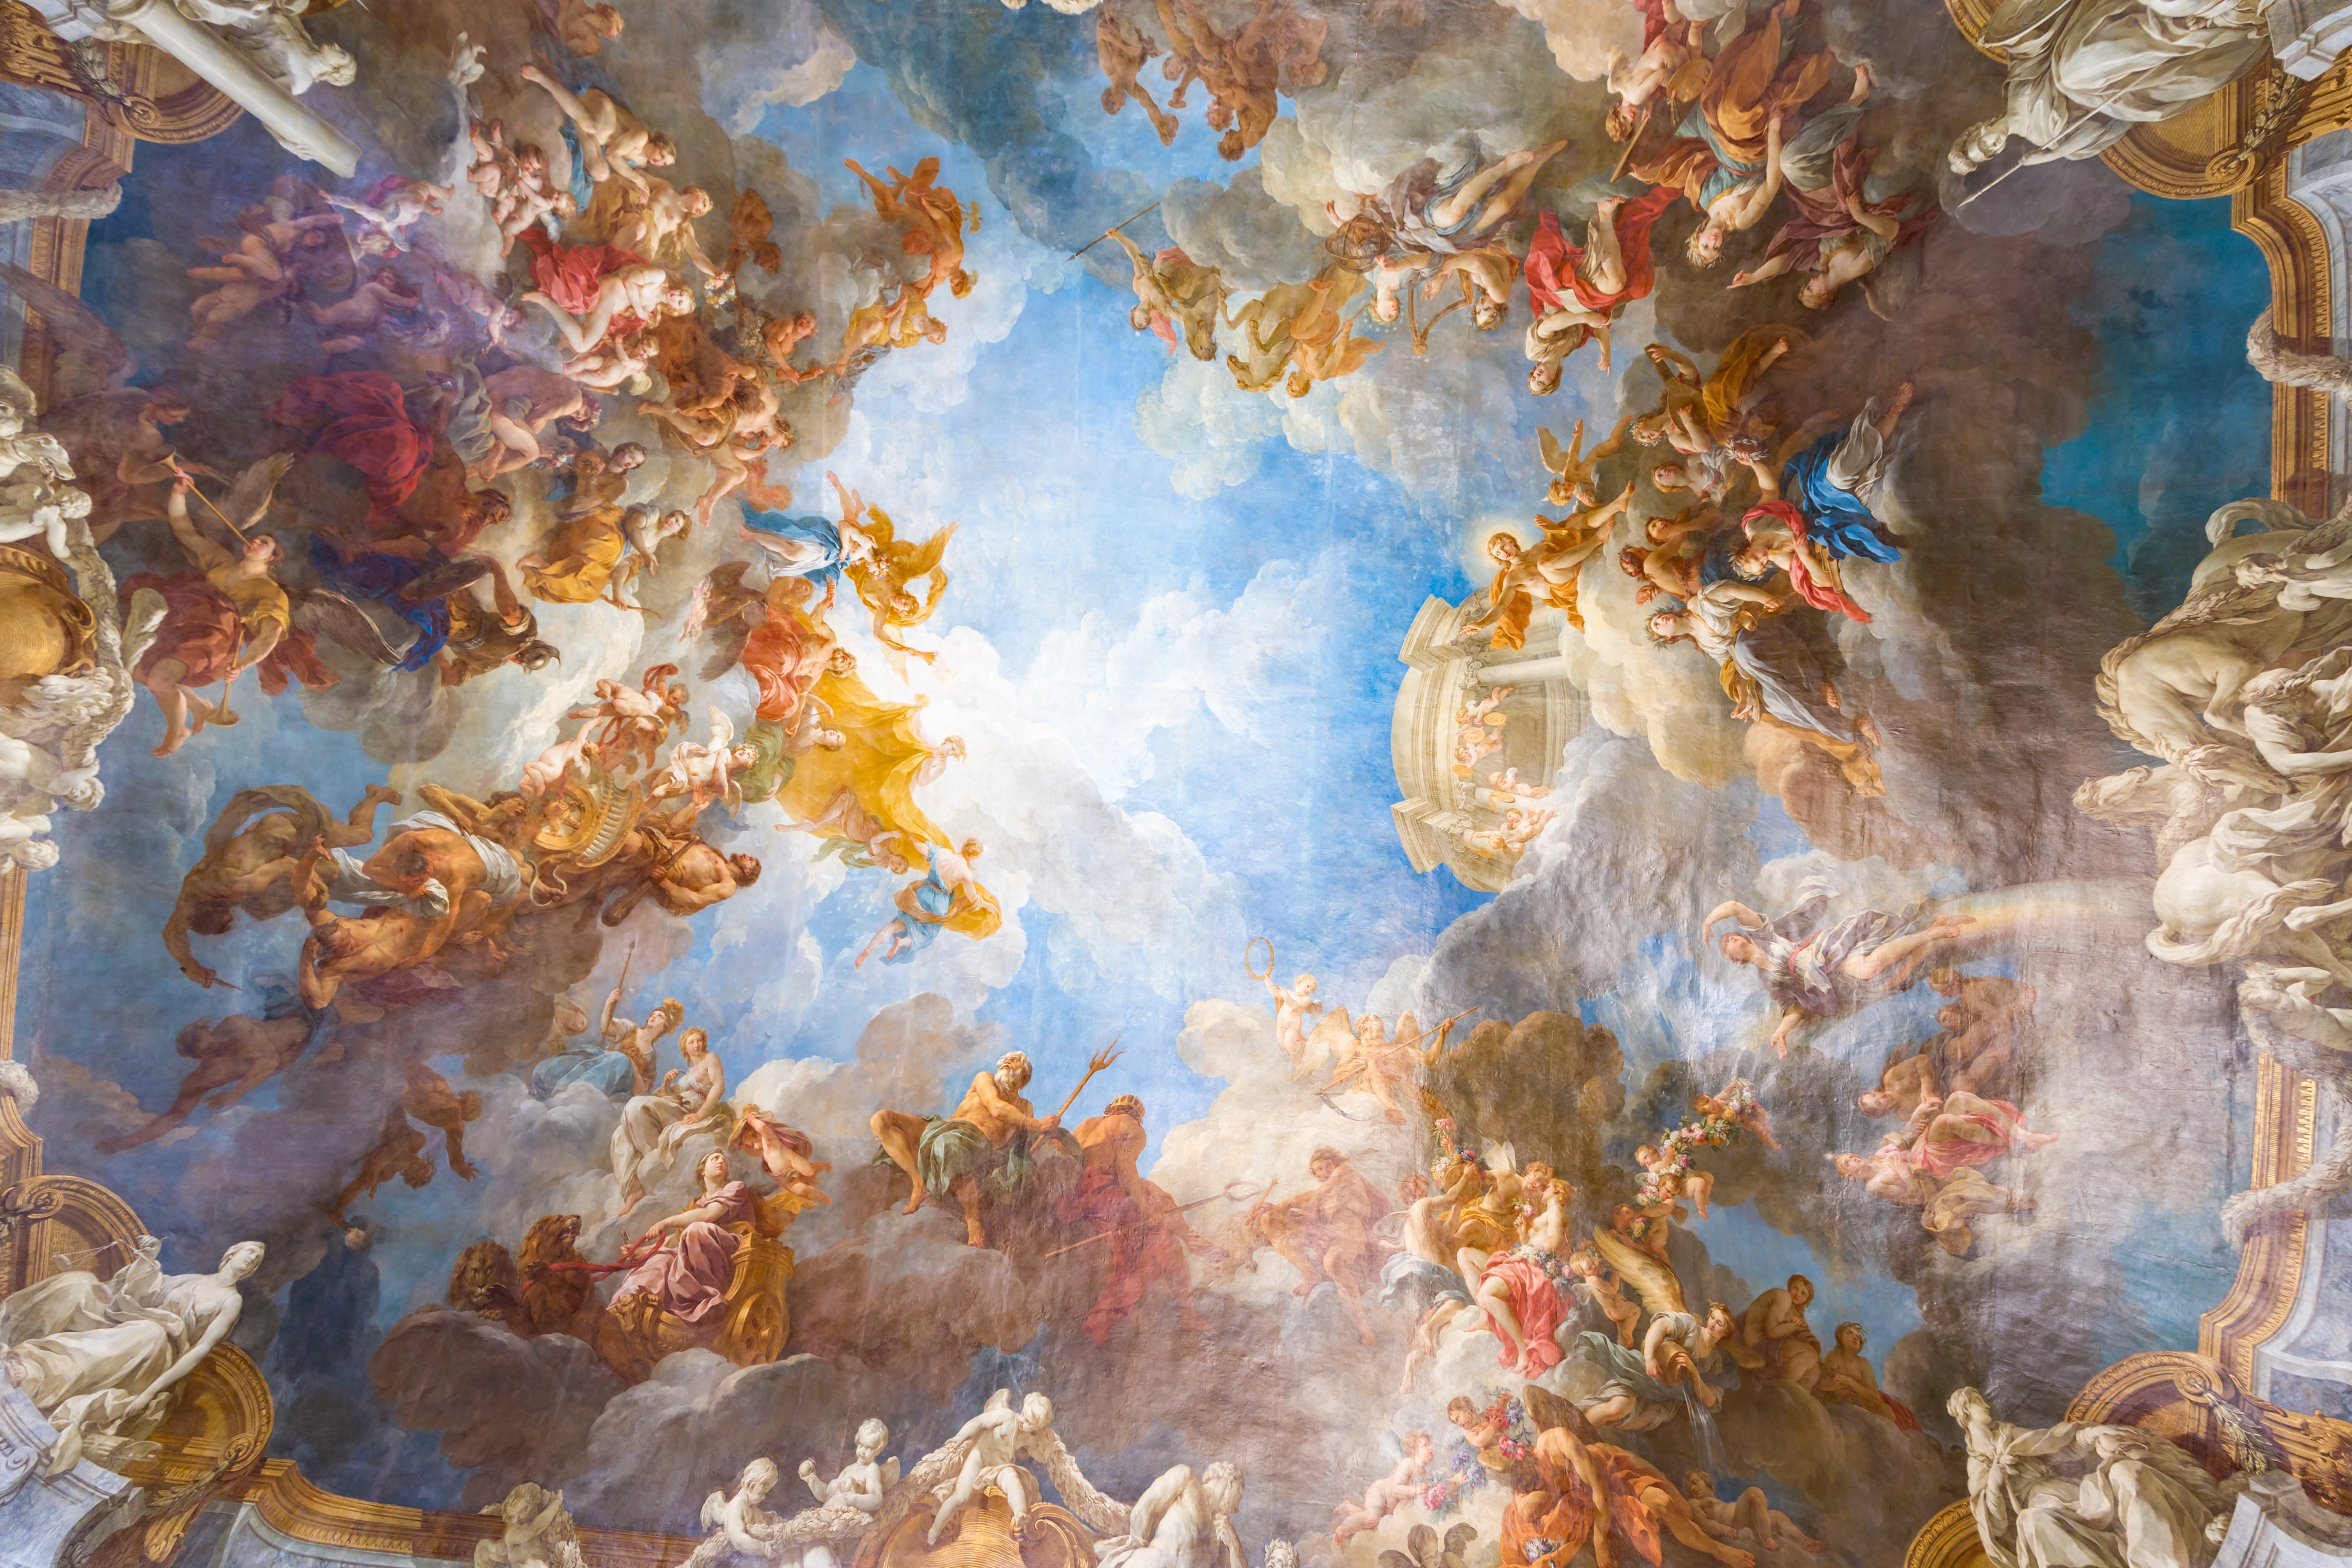 Original Images - Palace Of Versailles Painting , HD Wallpaper & Backgrounds